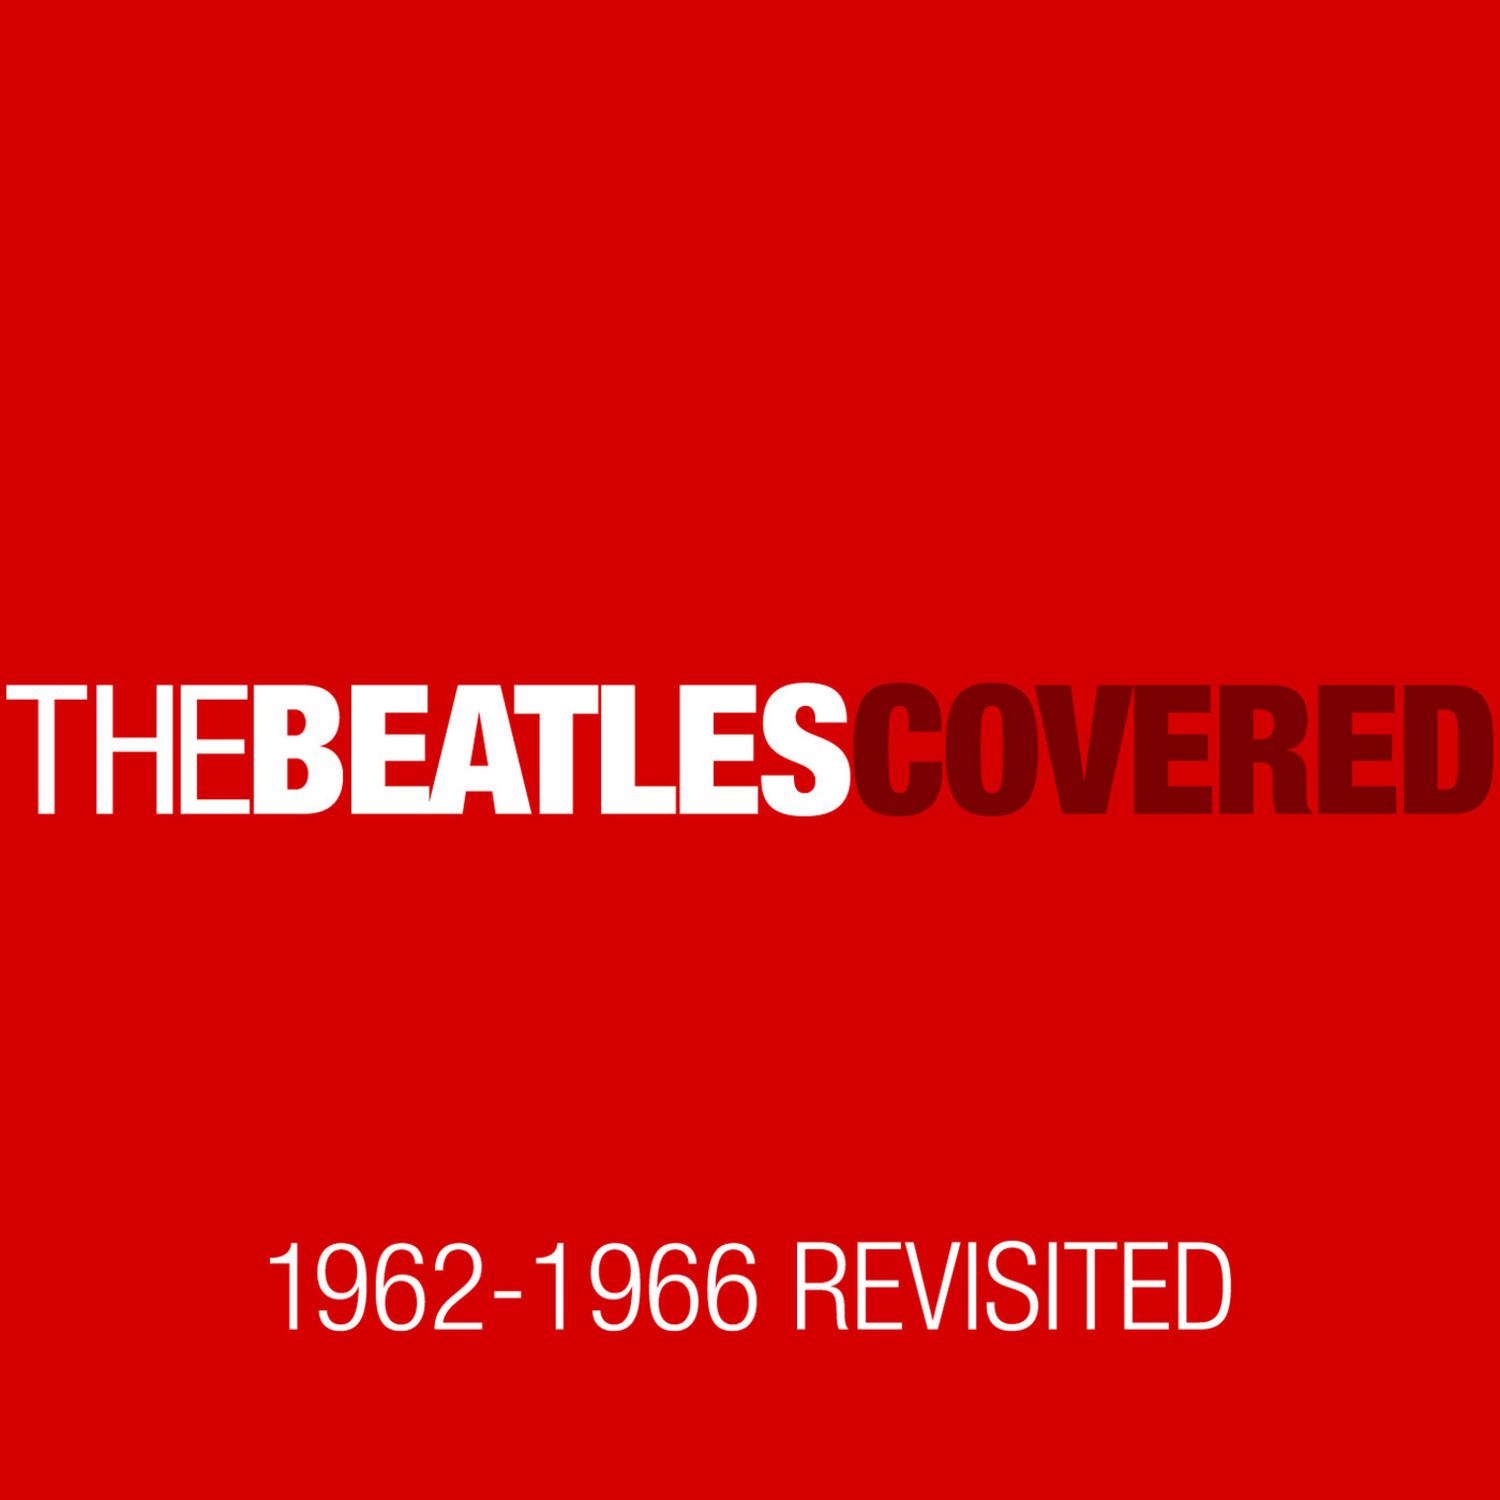 The Beatles Covered 1962-1966 Revisited